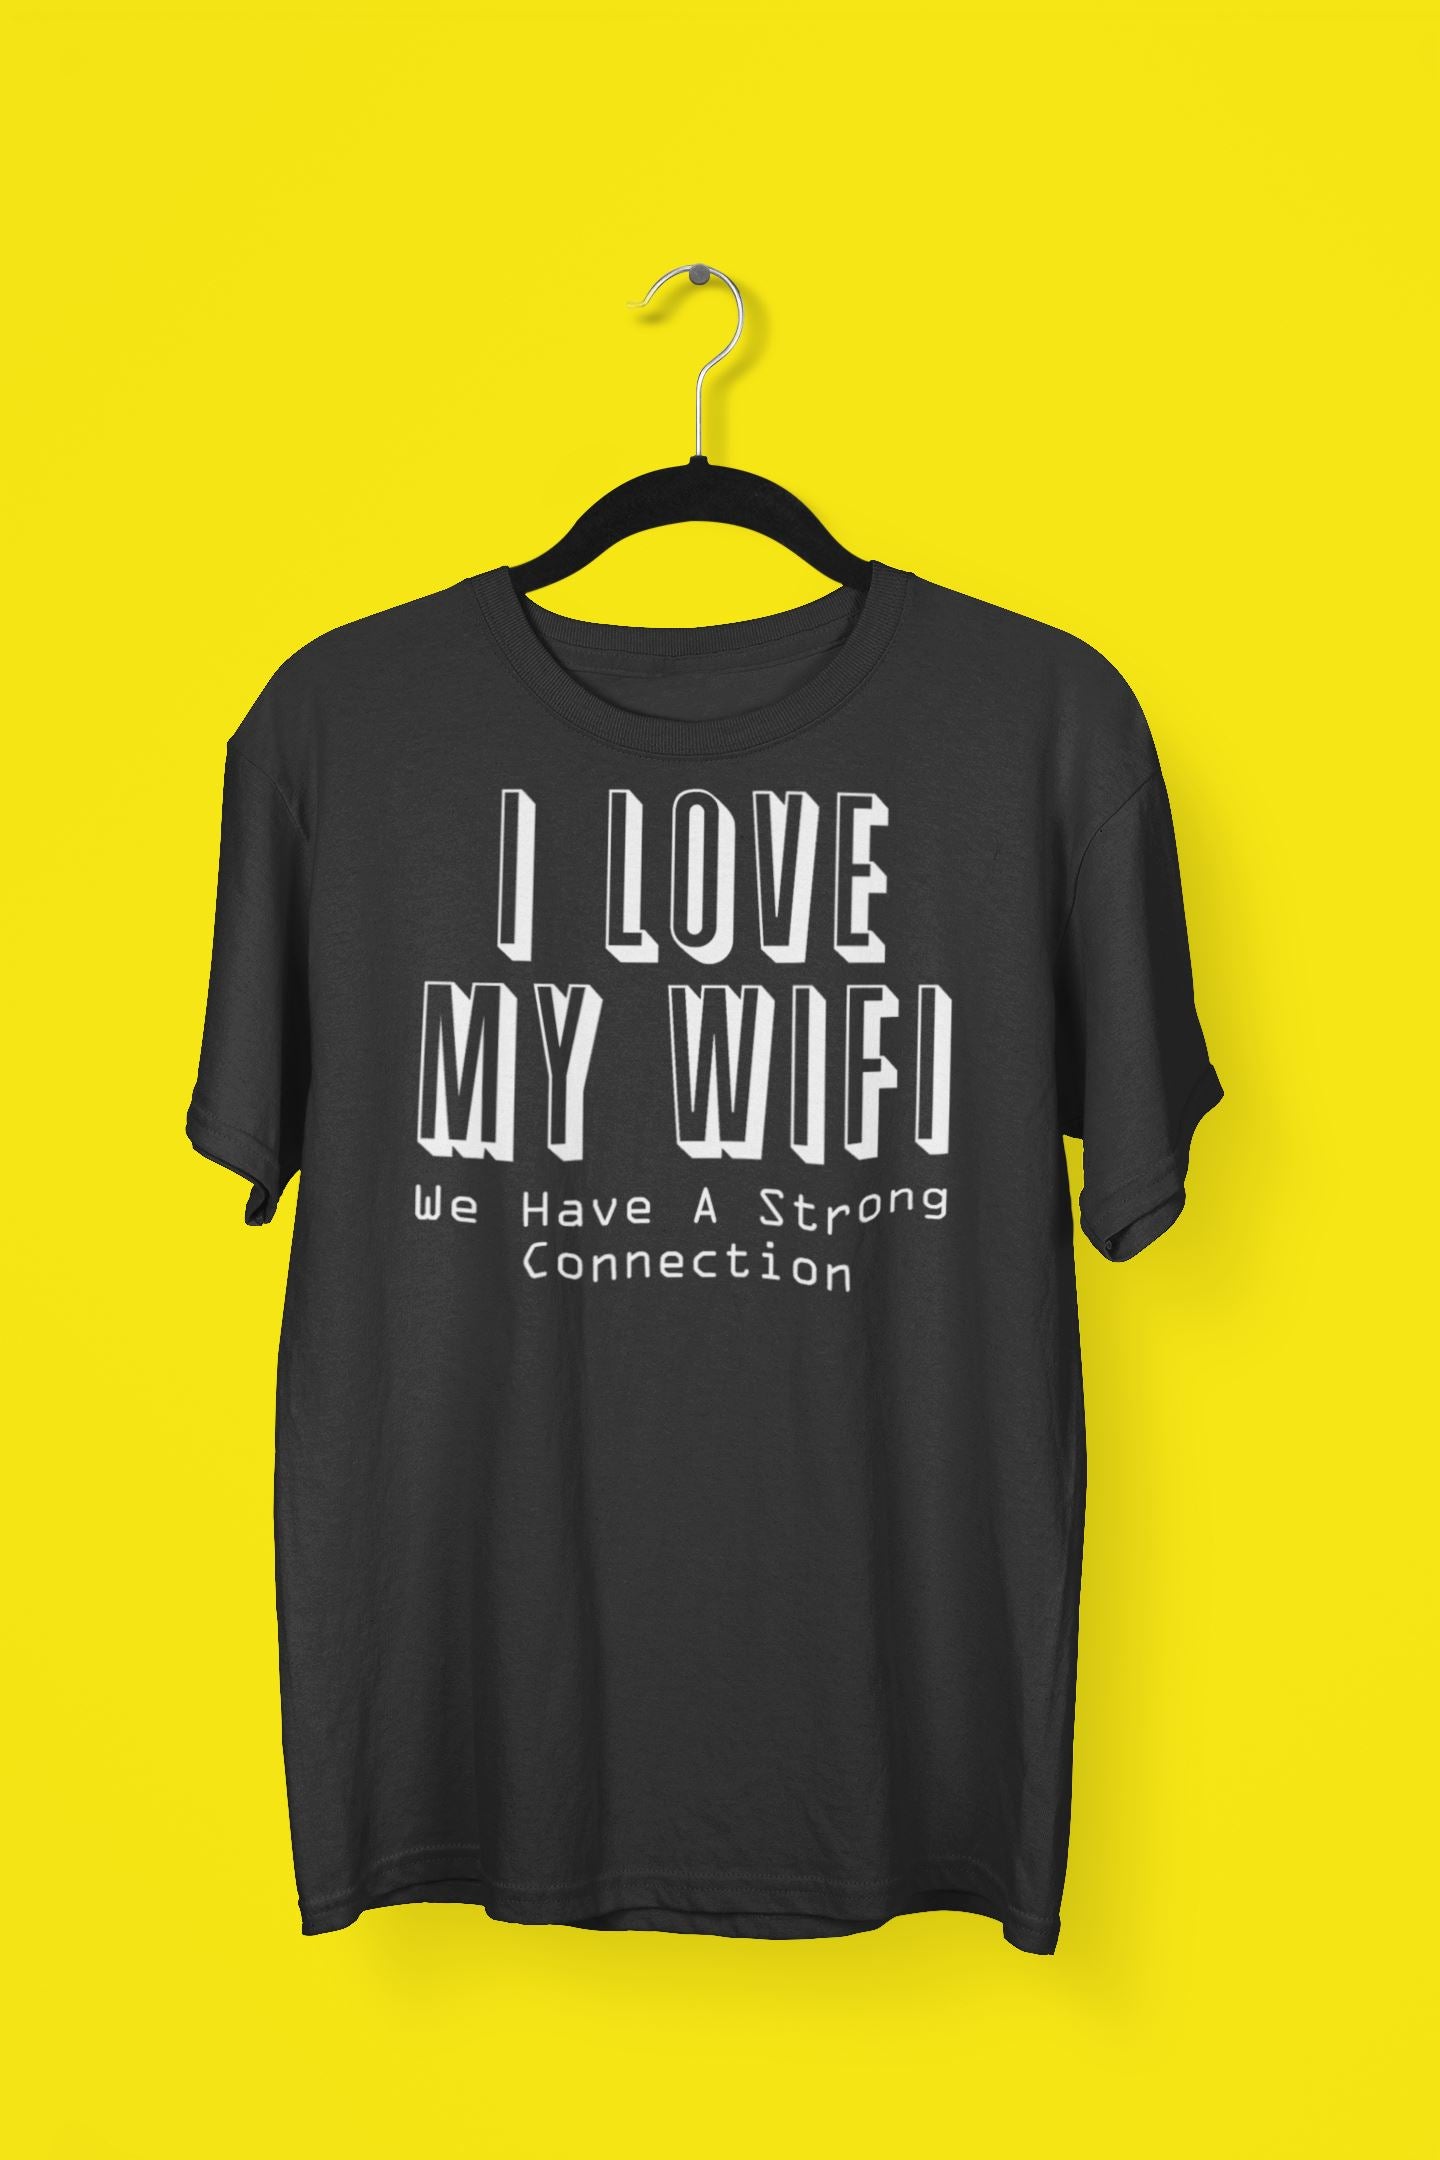 I Love My Wifi, We Have a Strong Connection Funny Black T Shirt for Men freeshipping - Catch My Drift India